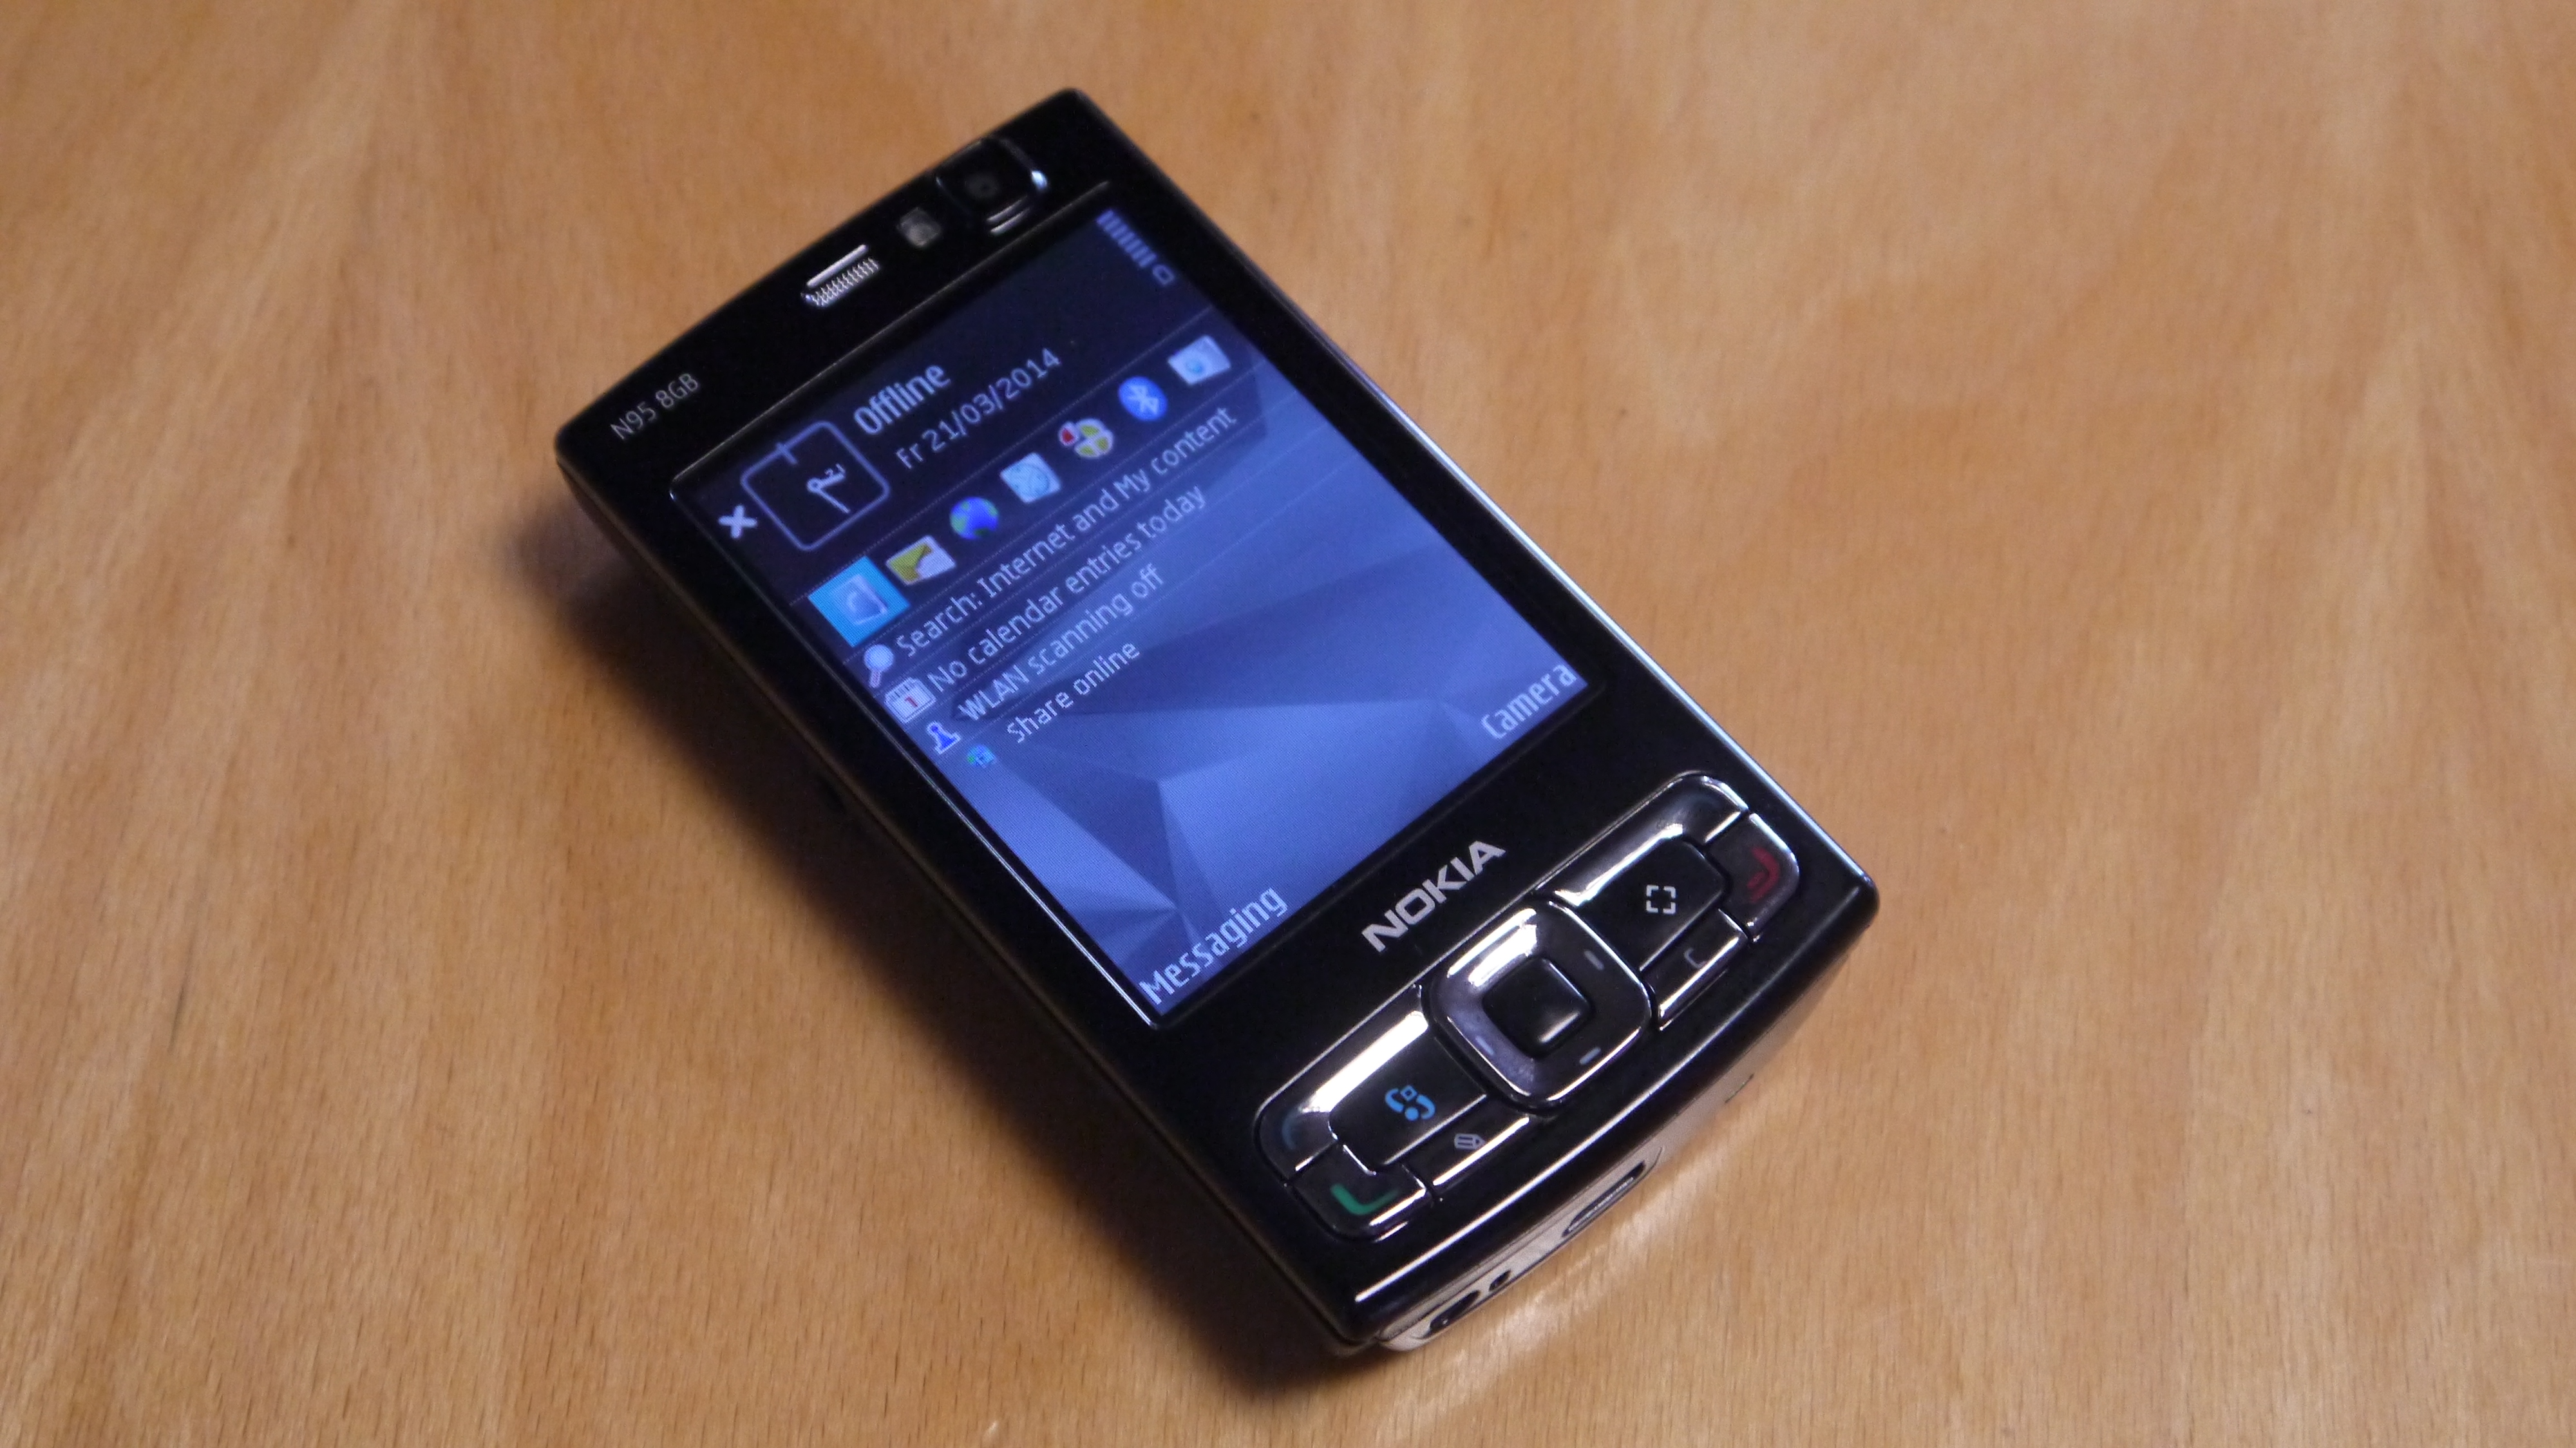 The N95 The Brilliant Smartphone That Almost Brought Nokia To Its